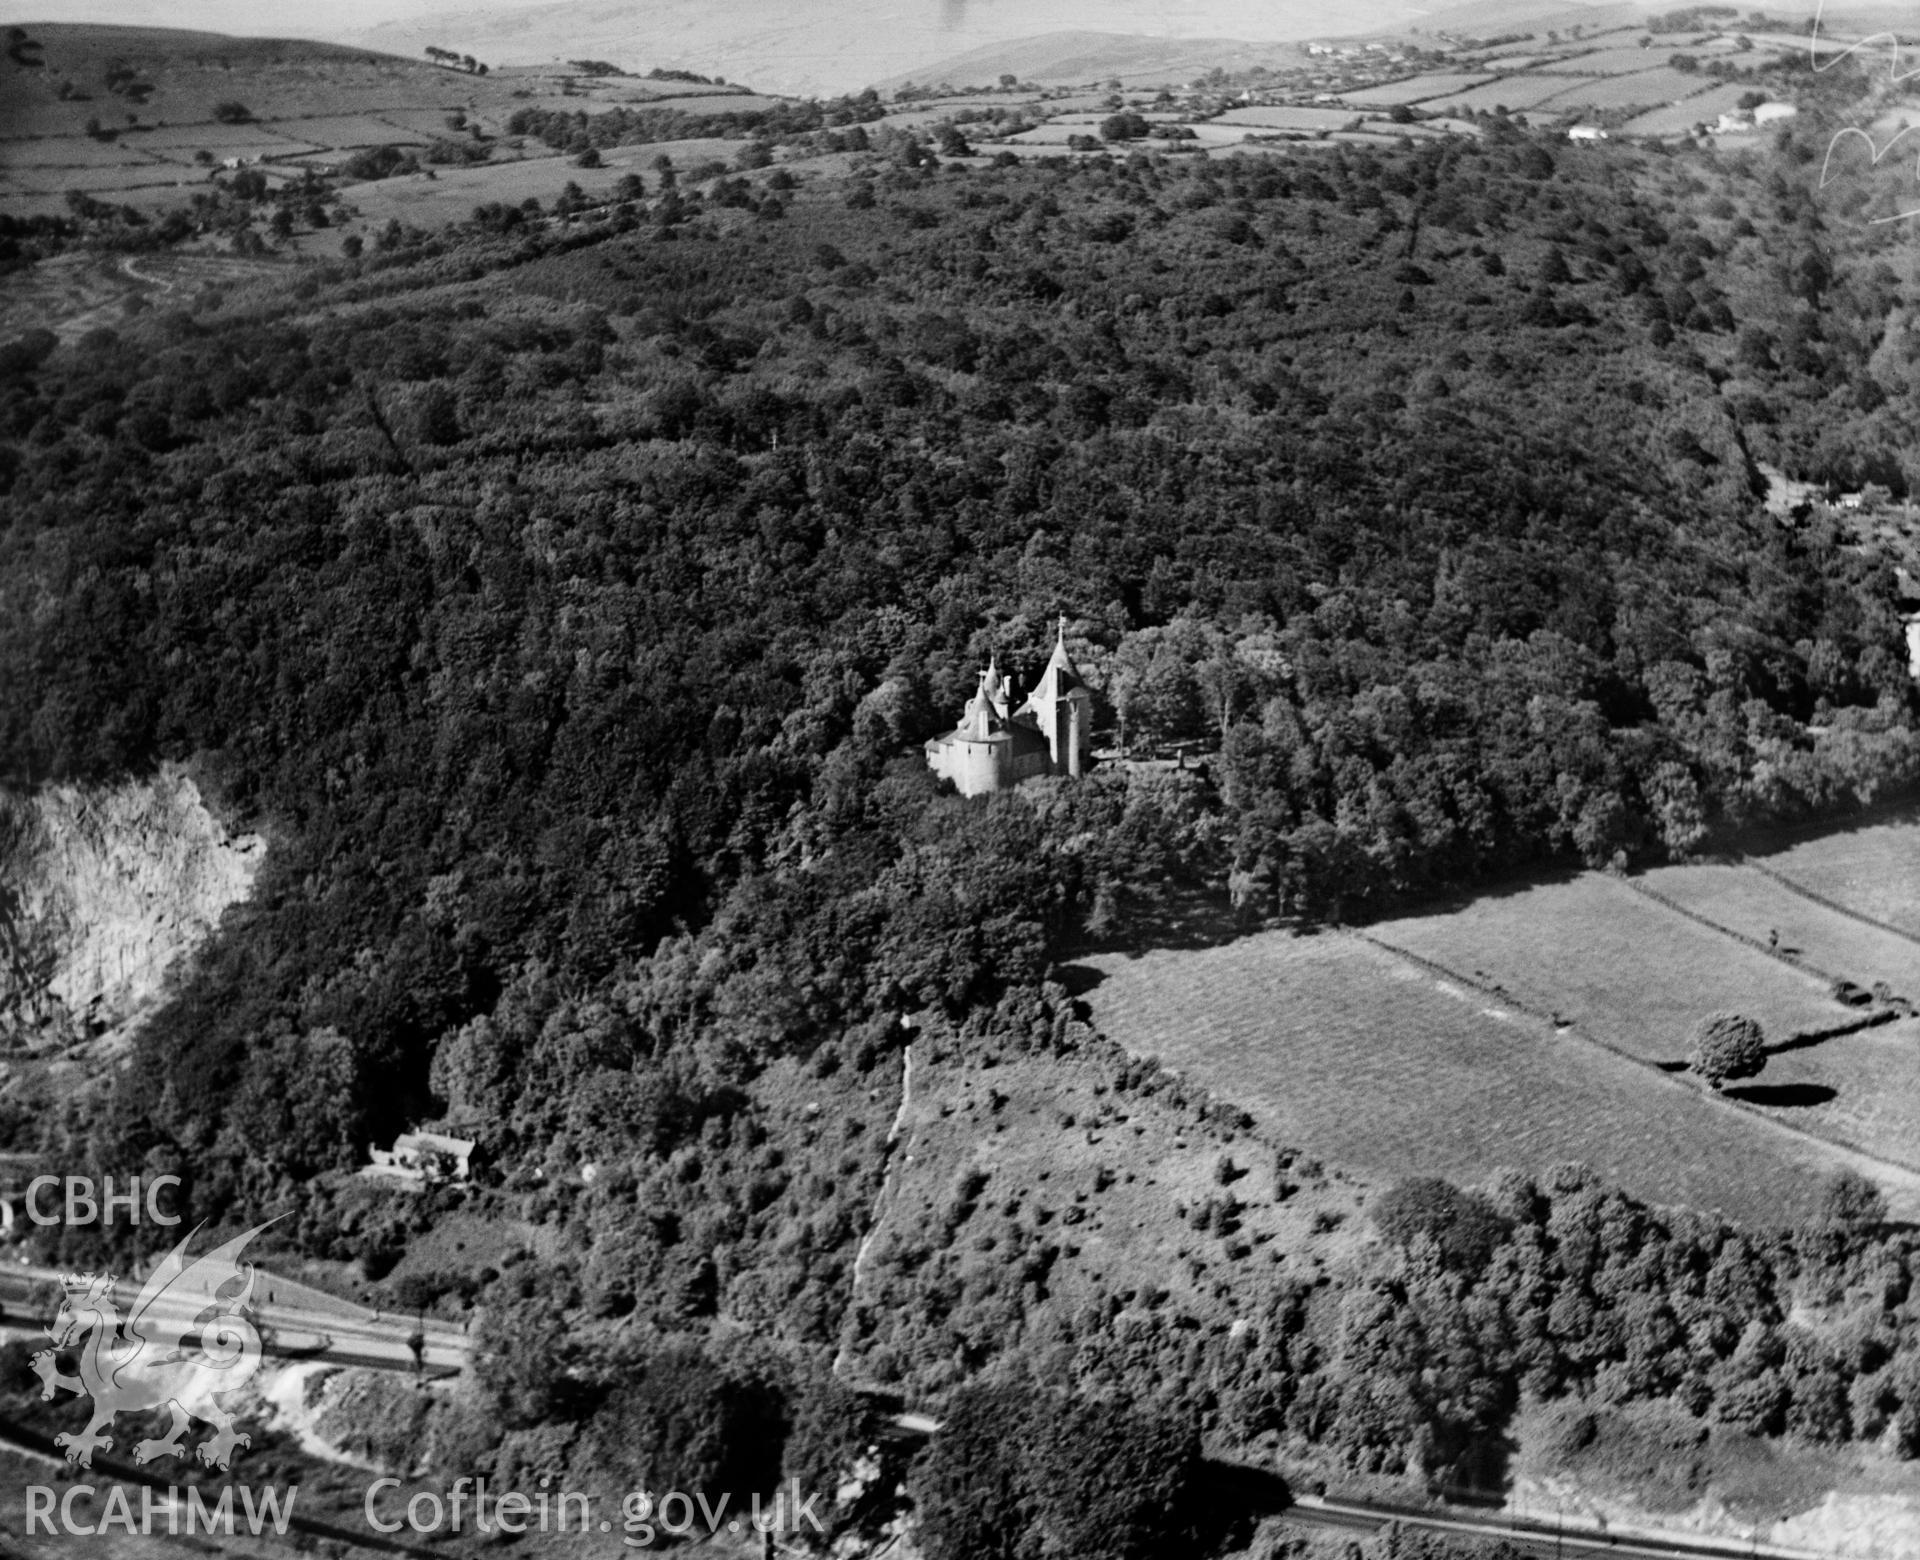 View of Castell Coch, Tongwynlais, oblique aerial view. 5?x4? black and white glass plate negative.